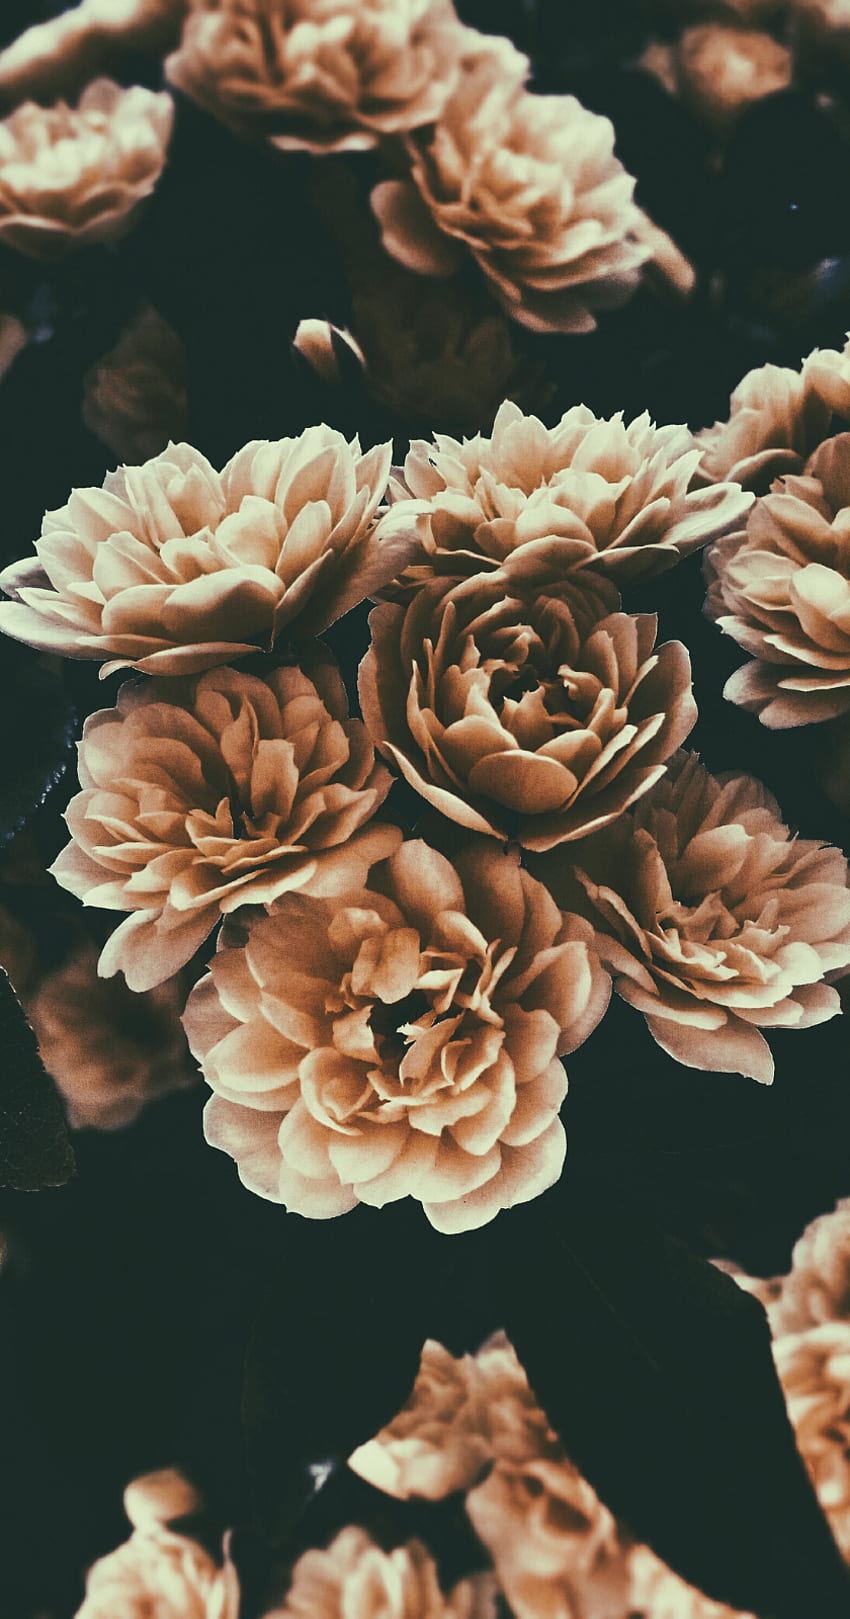 Golden Flowers On A Brown Background Abstraction Photography Wallpaper On  The Wall Stock Photo  Download Image Now  iStock